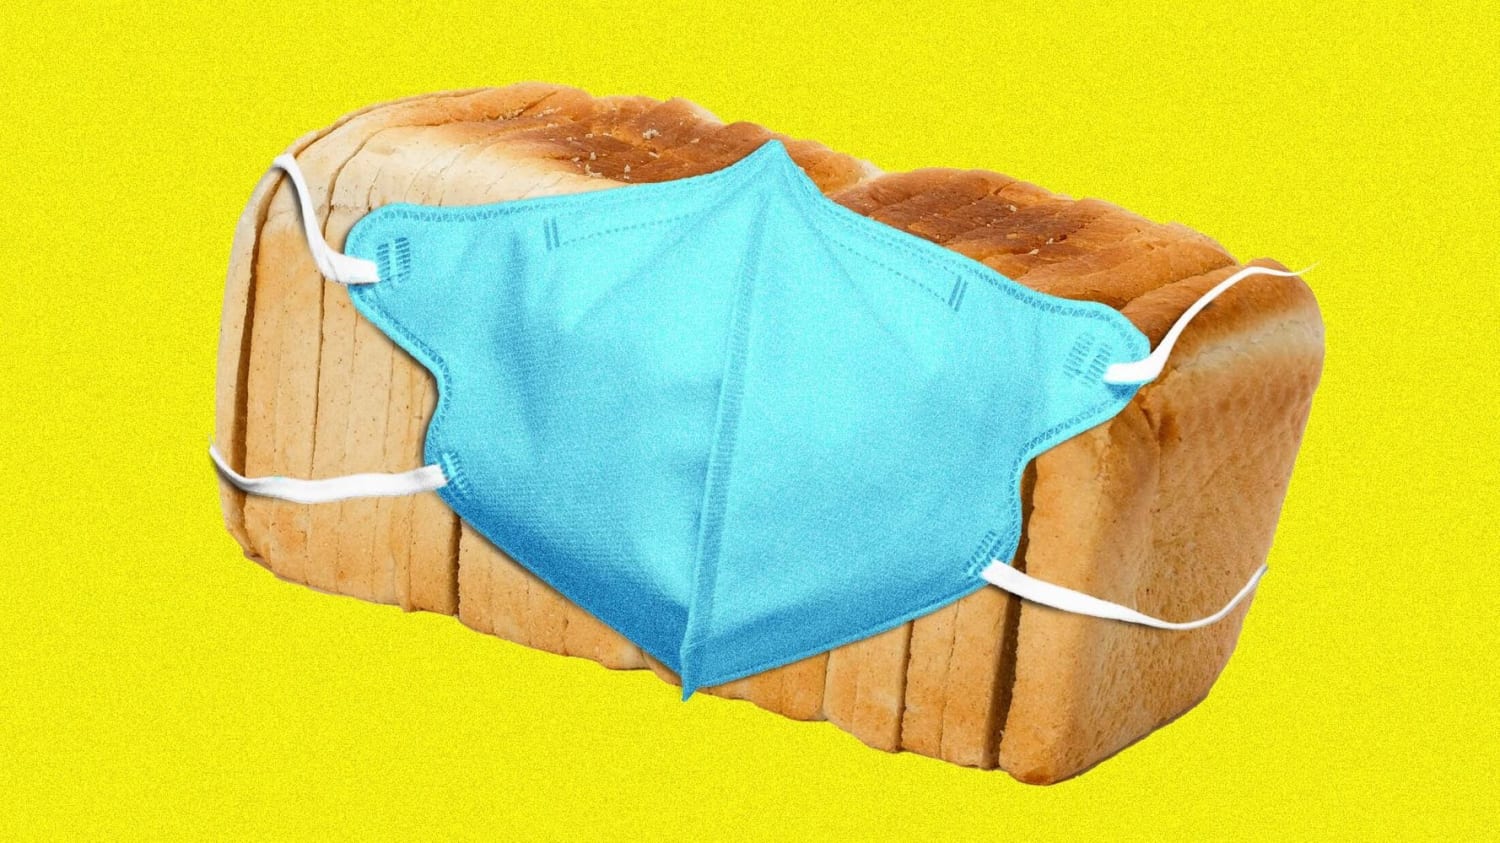 Why Bread? Quarantine Bakers Explain What Fueled Their Obsession